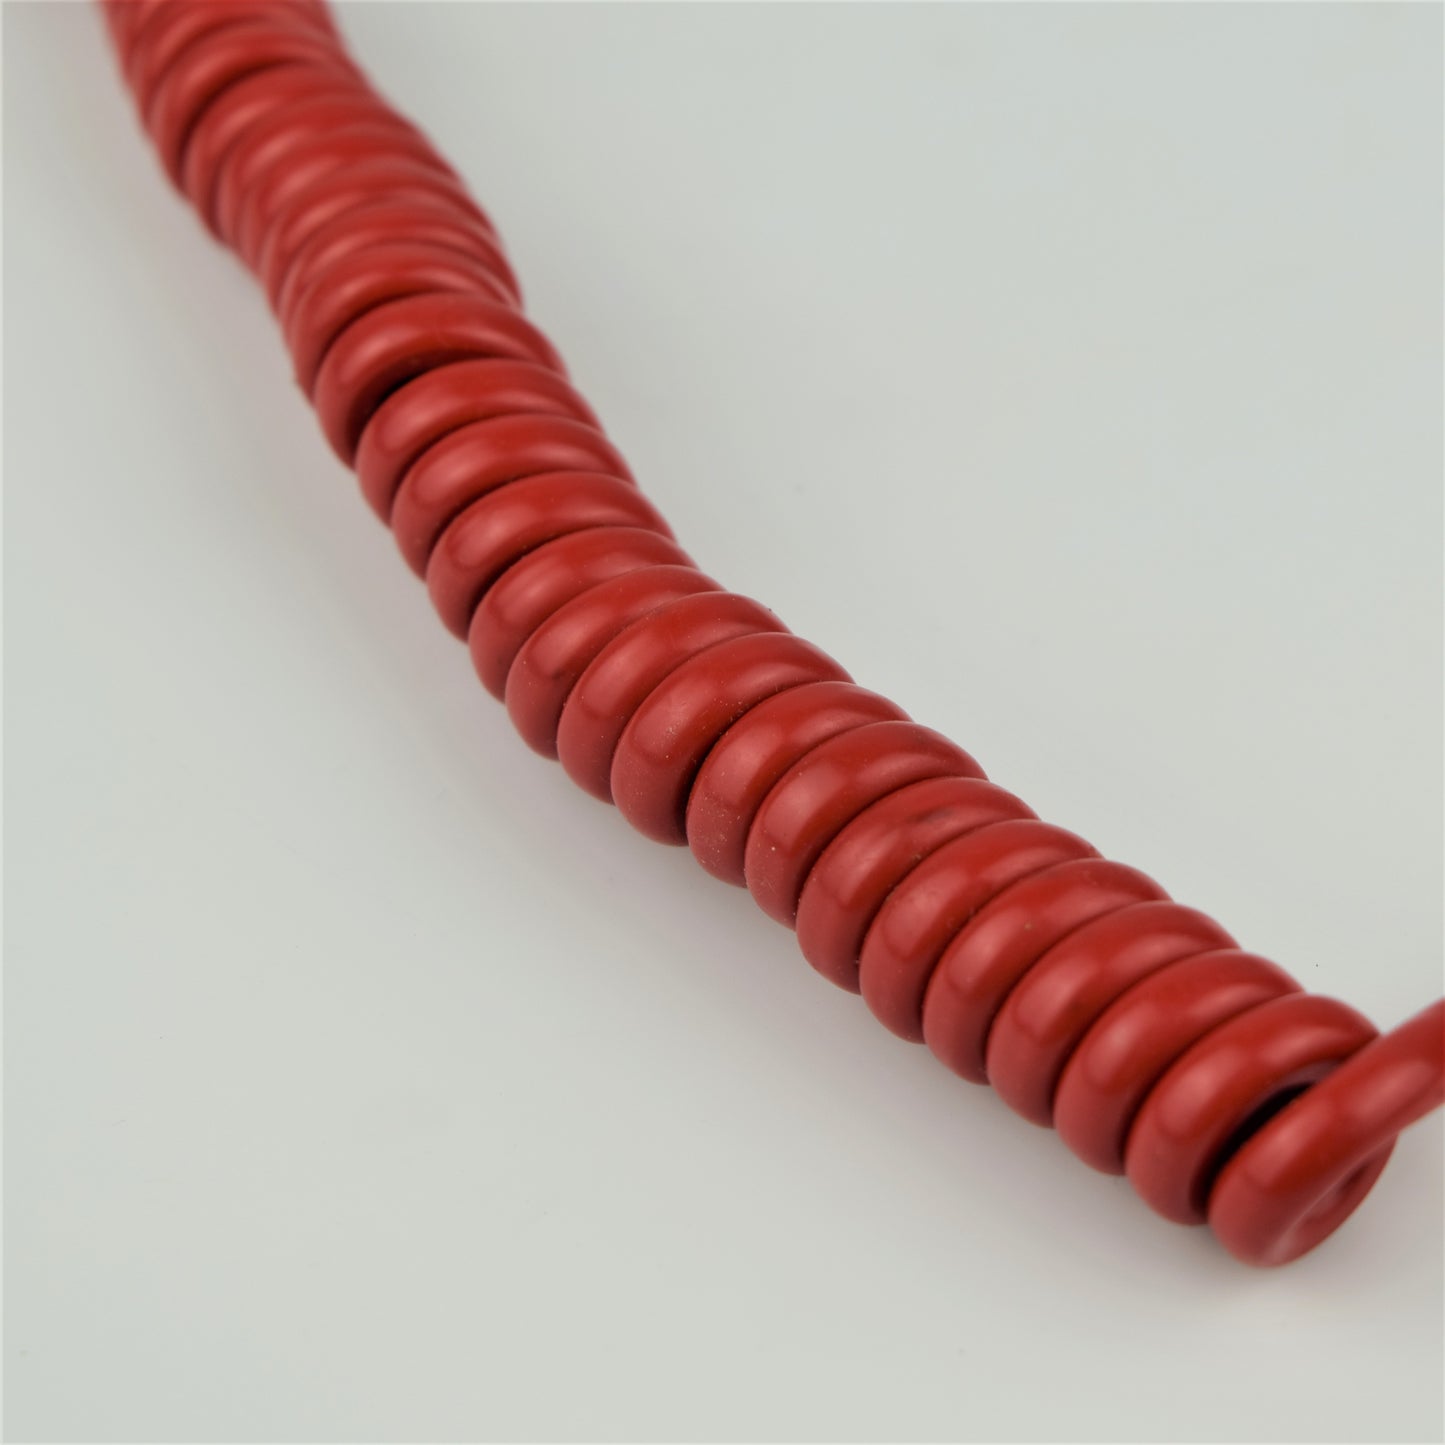 Cord - Handset - Bright Red - Hardwired Curly - 4 Conductor - spade terminations